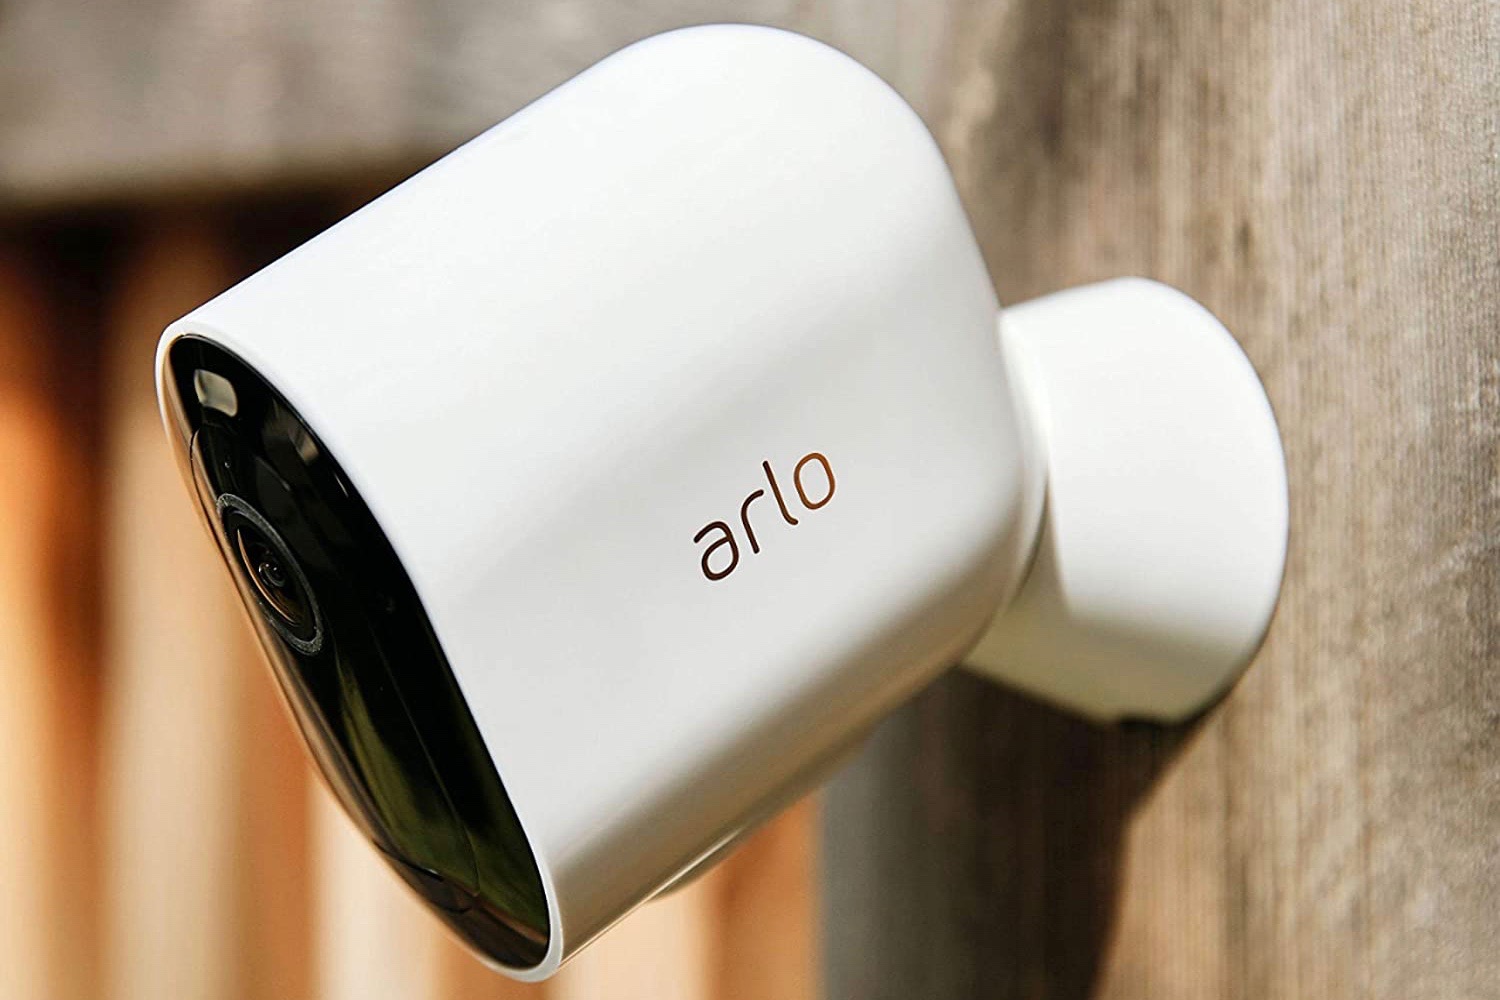 The Arlo Pro 4 home security camera installed outdoors.